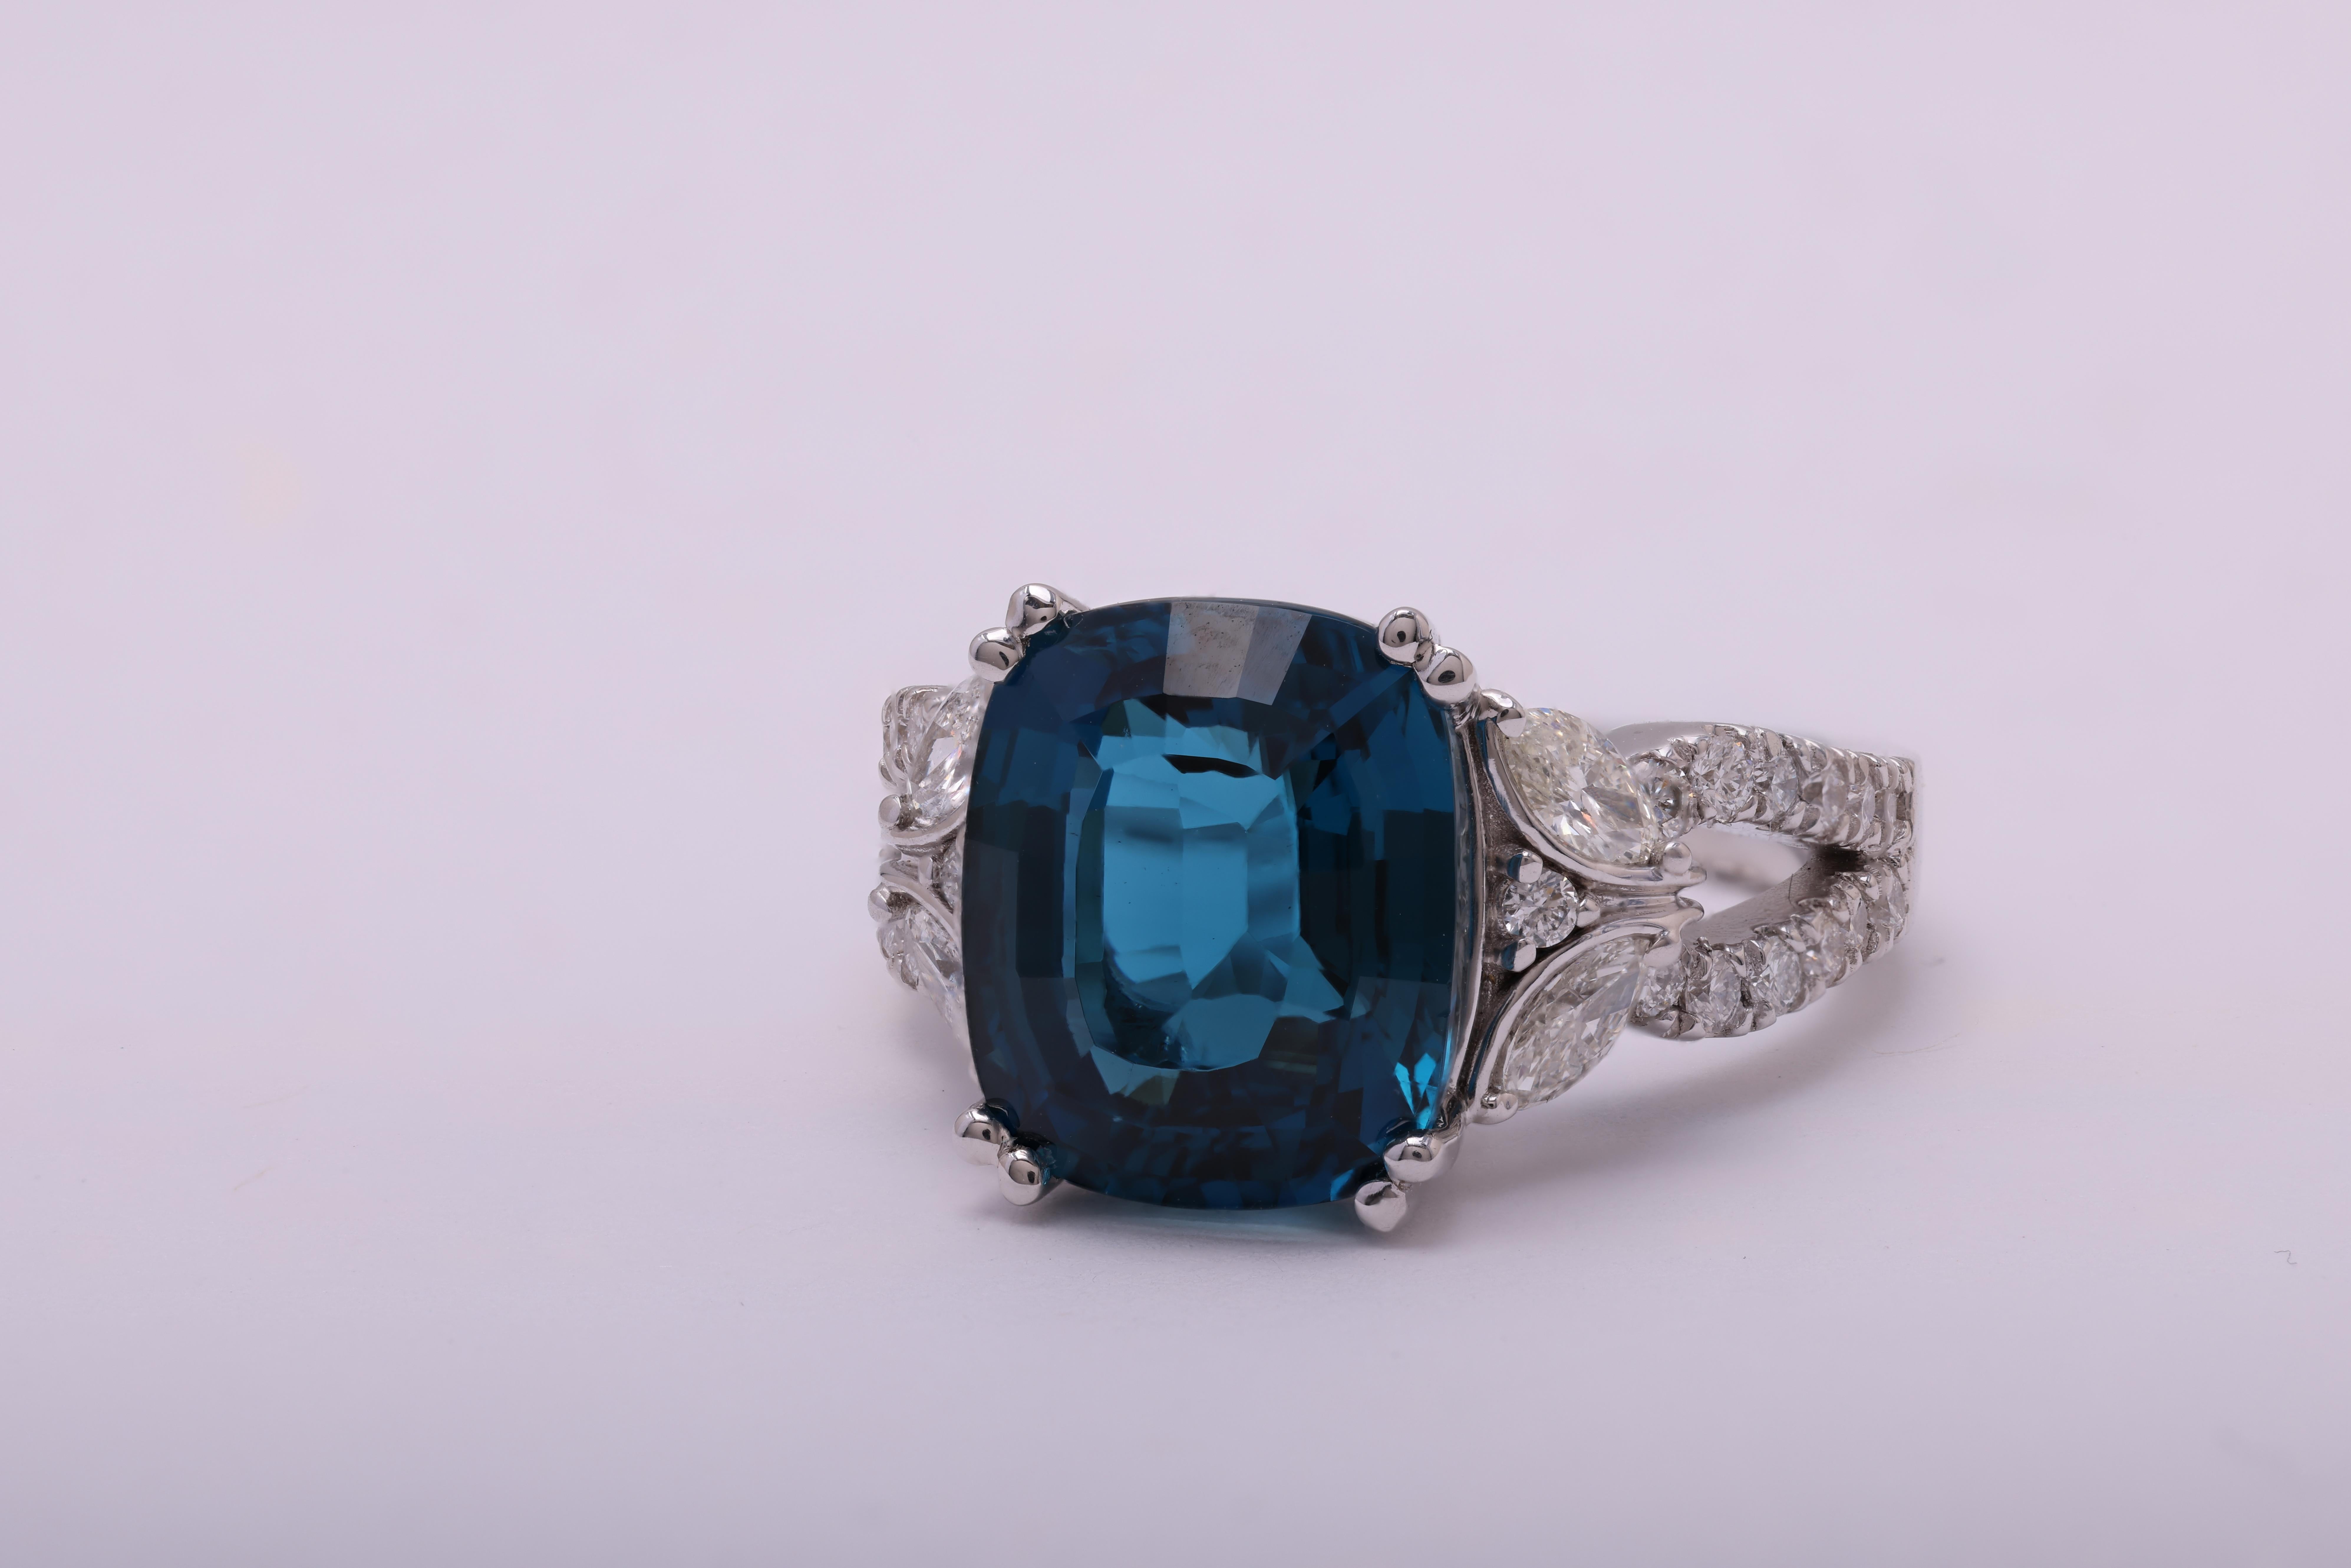 This exquisite ring showcases a 12mm by 10mm Oval Cut London Blue Topaz at its center, elegantly perched atop a beautifully hand-engraved milgrain setting. Adding to its charm, the side shank boasts a delicate butterfly design, crafted from marquise